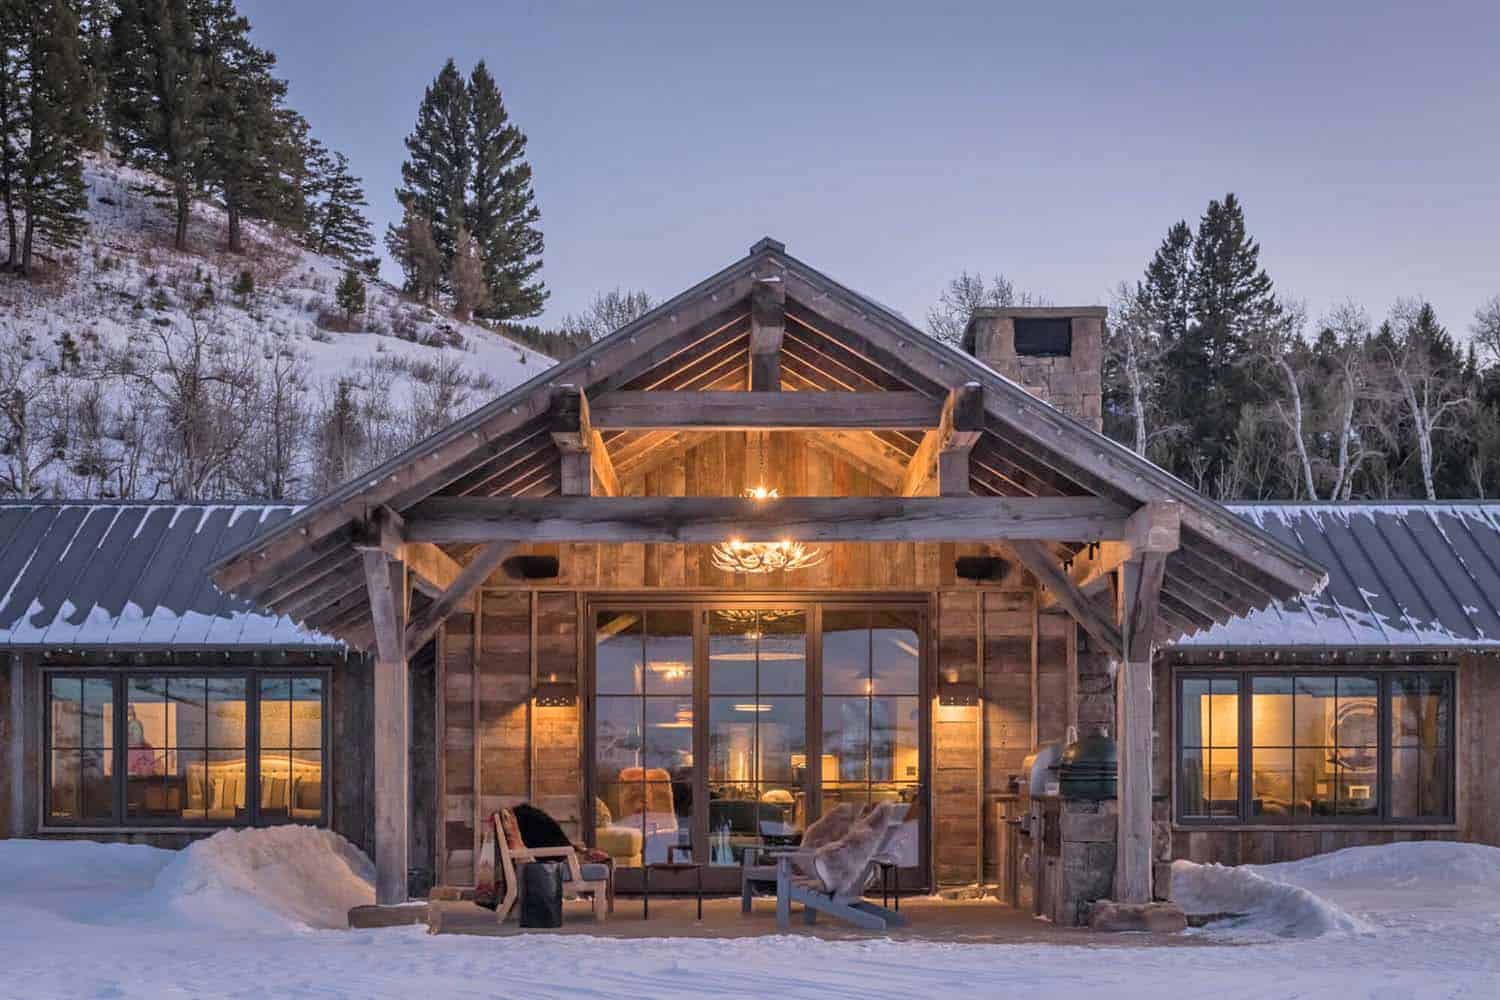 Montana guest cabin provides a cozy getaway in an idyllic setting